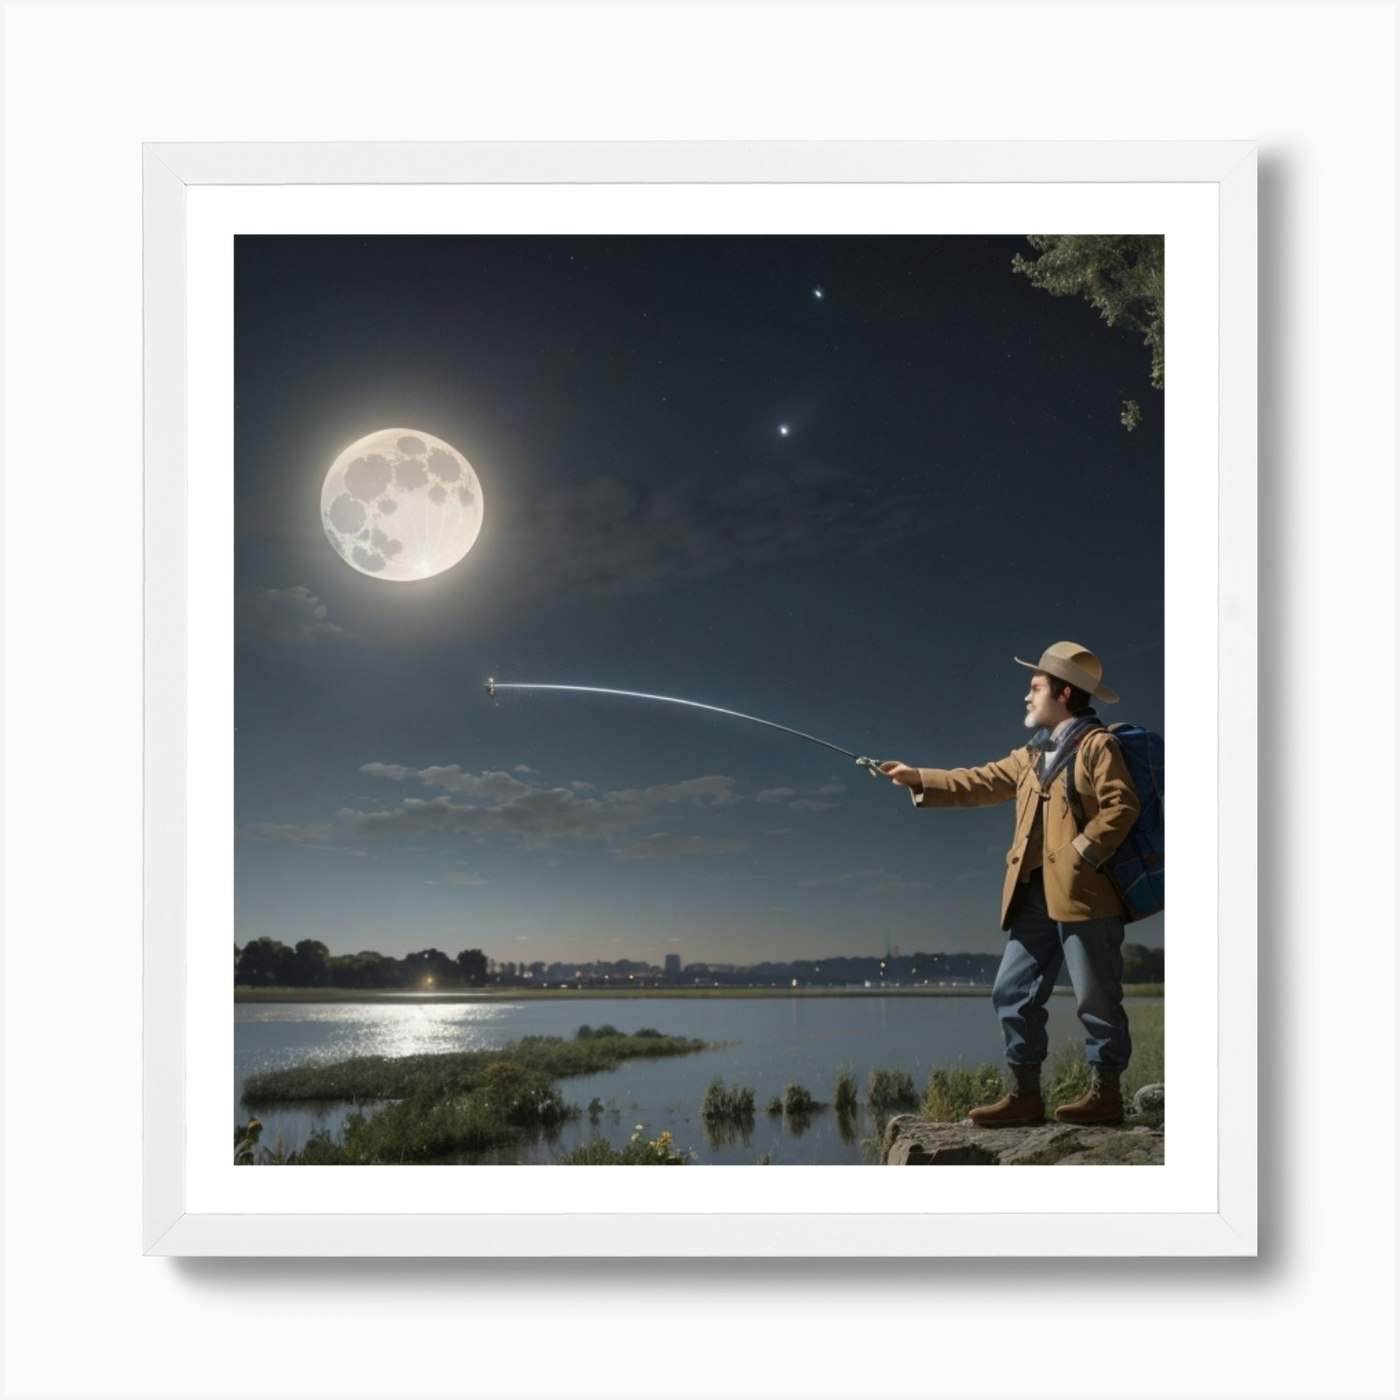 Fly Fisherman In The River Art Print